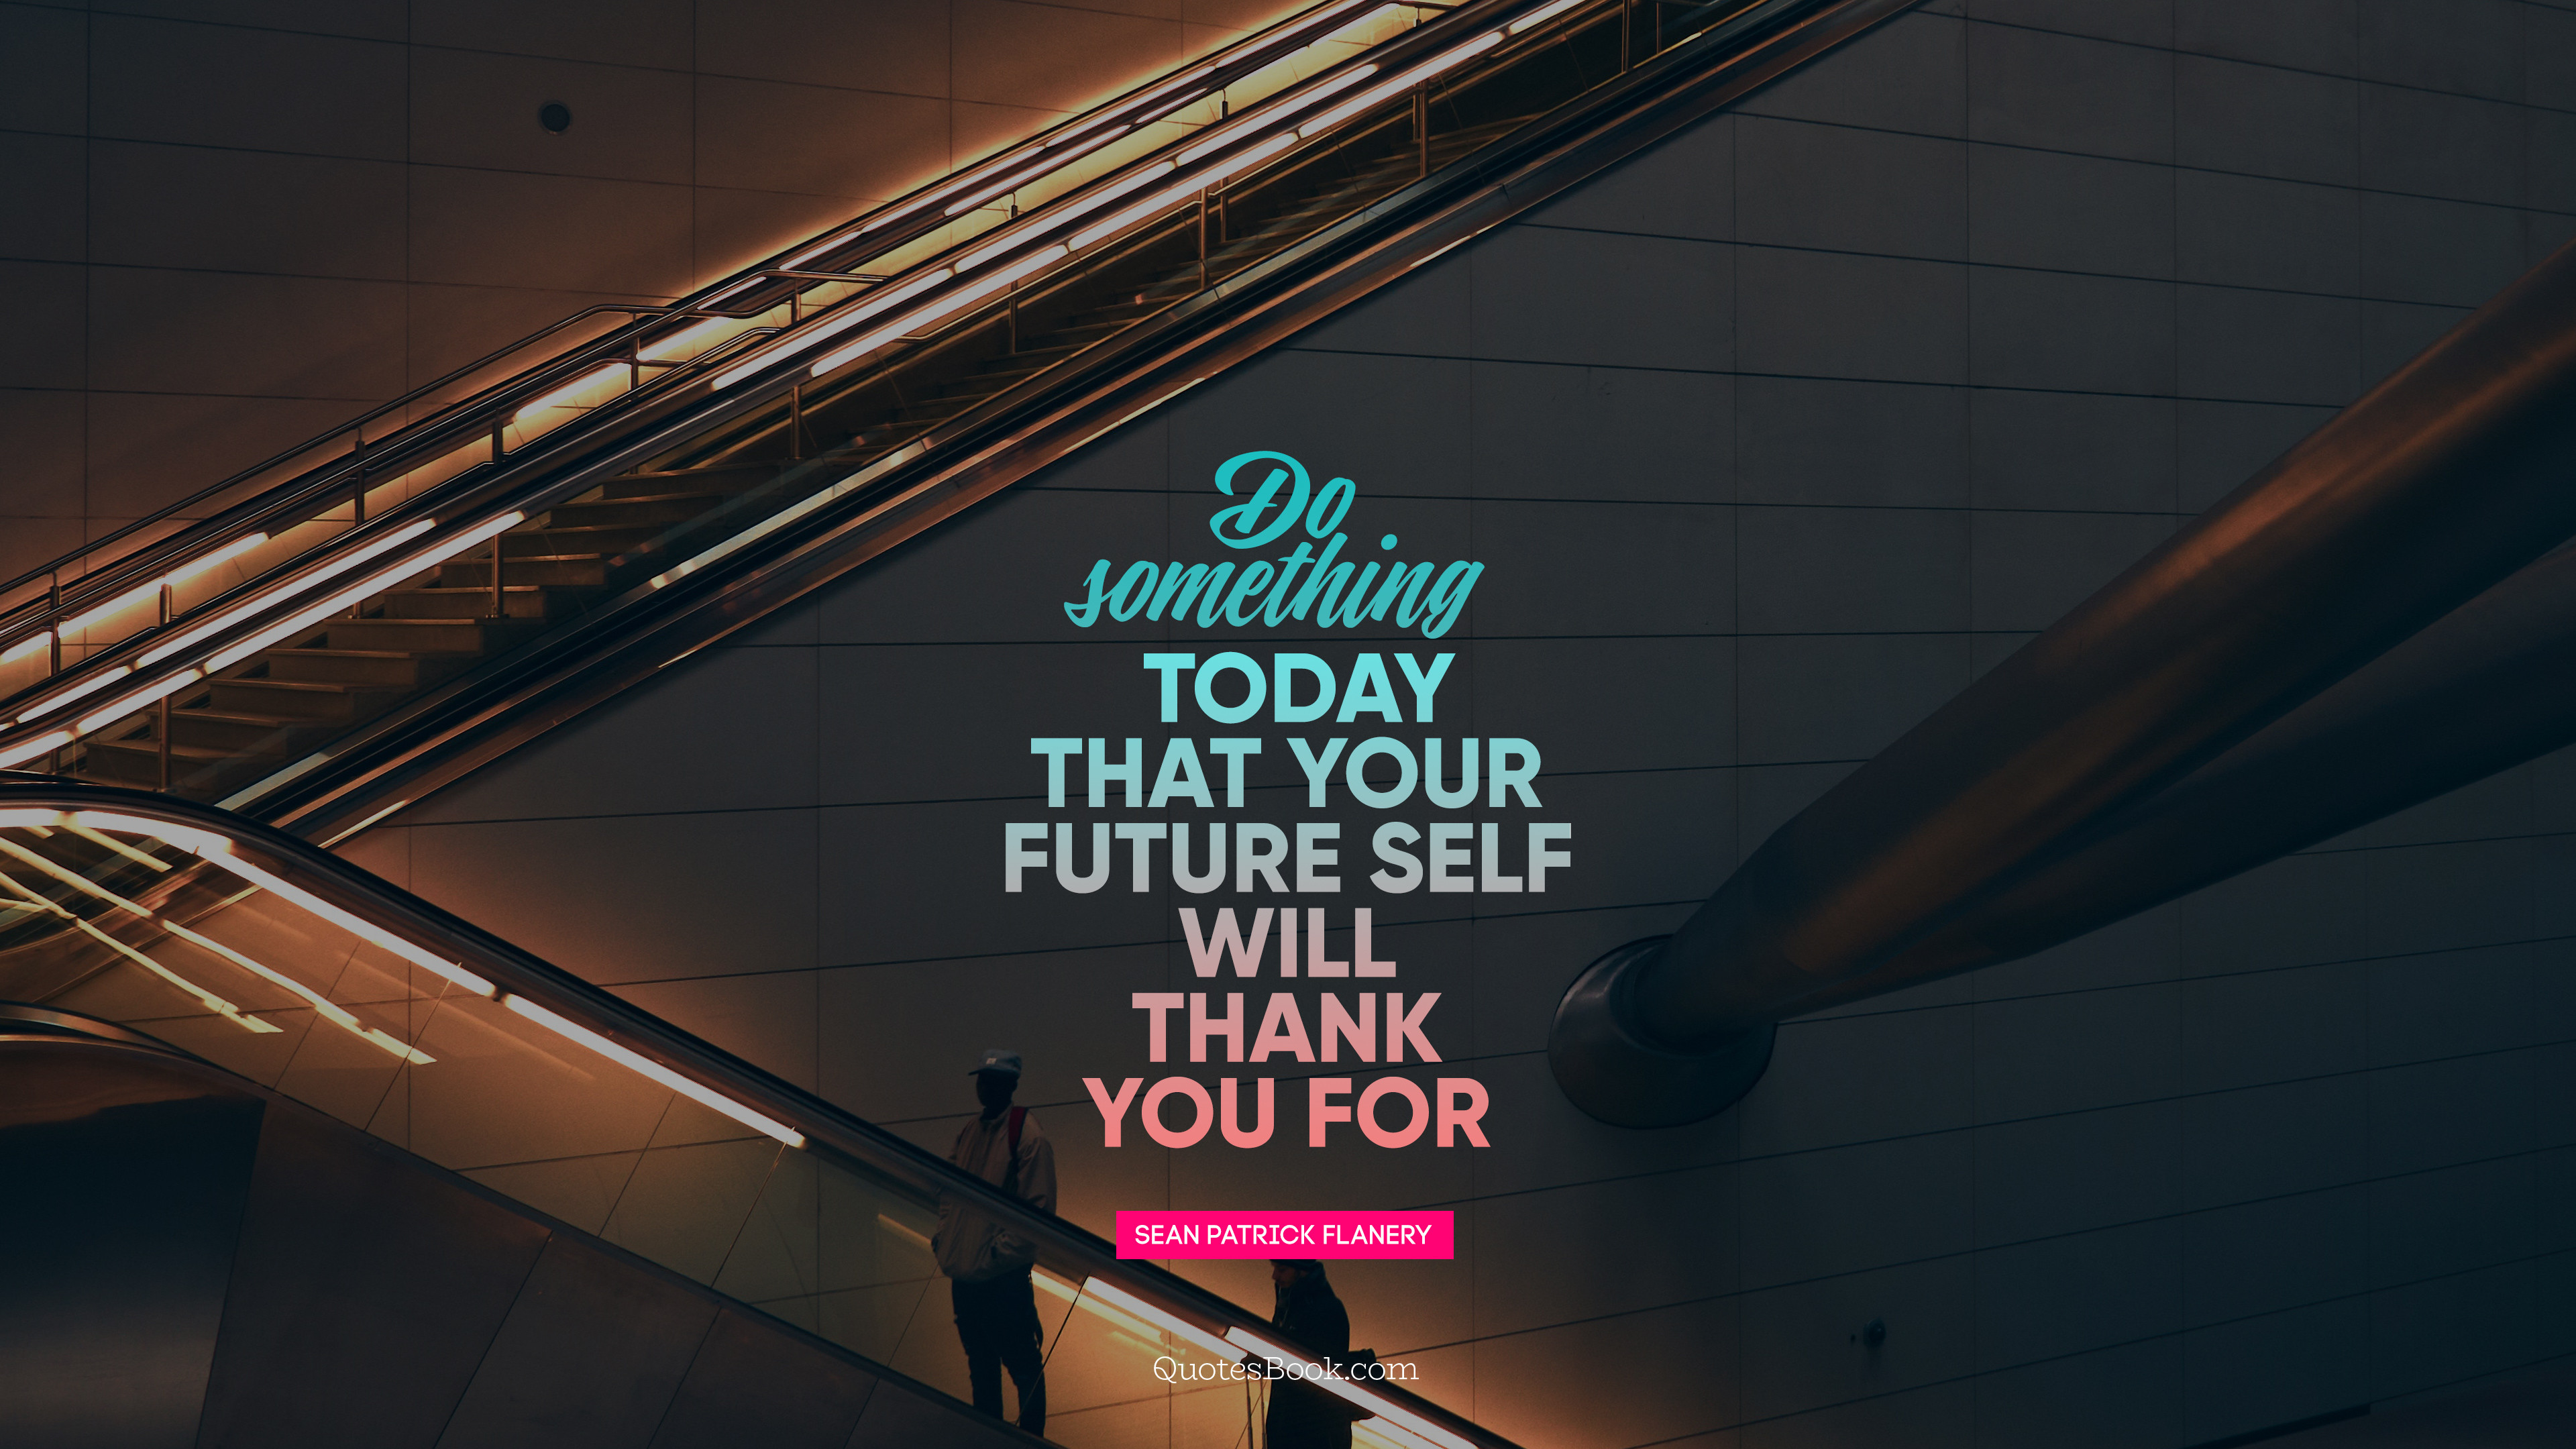 Do something today that your future self will thank you for - QuotesBook